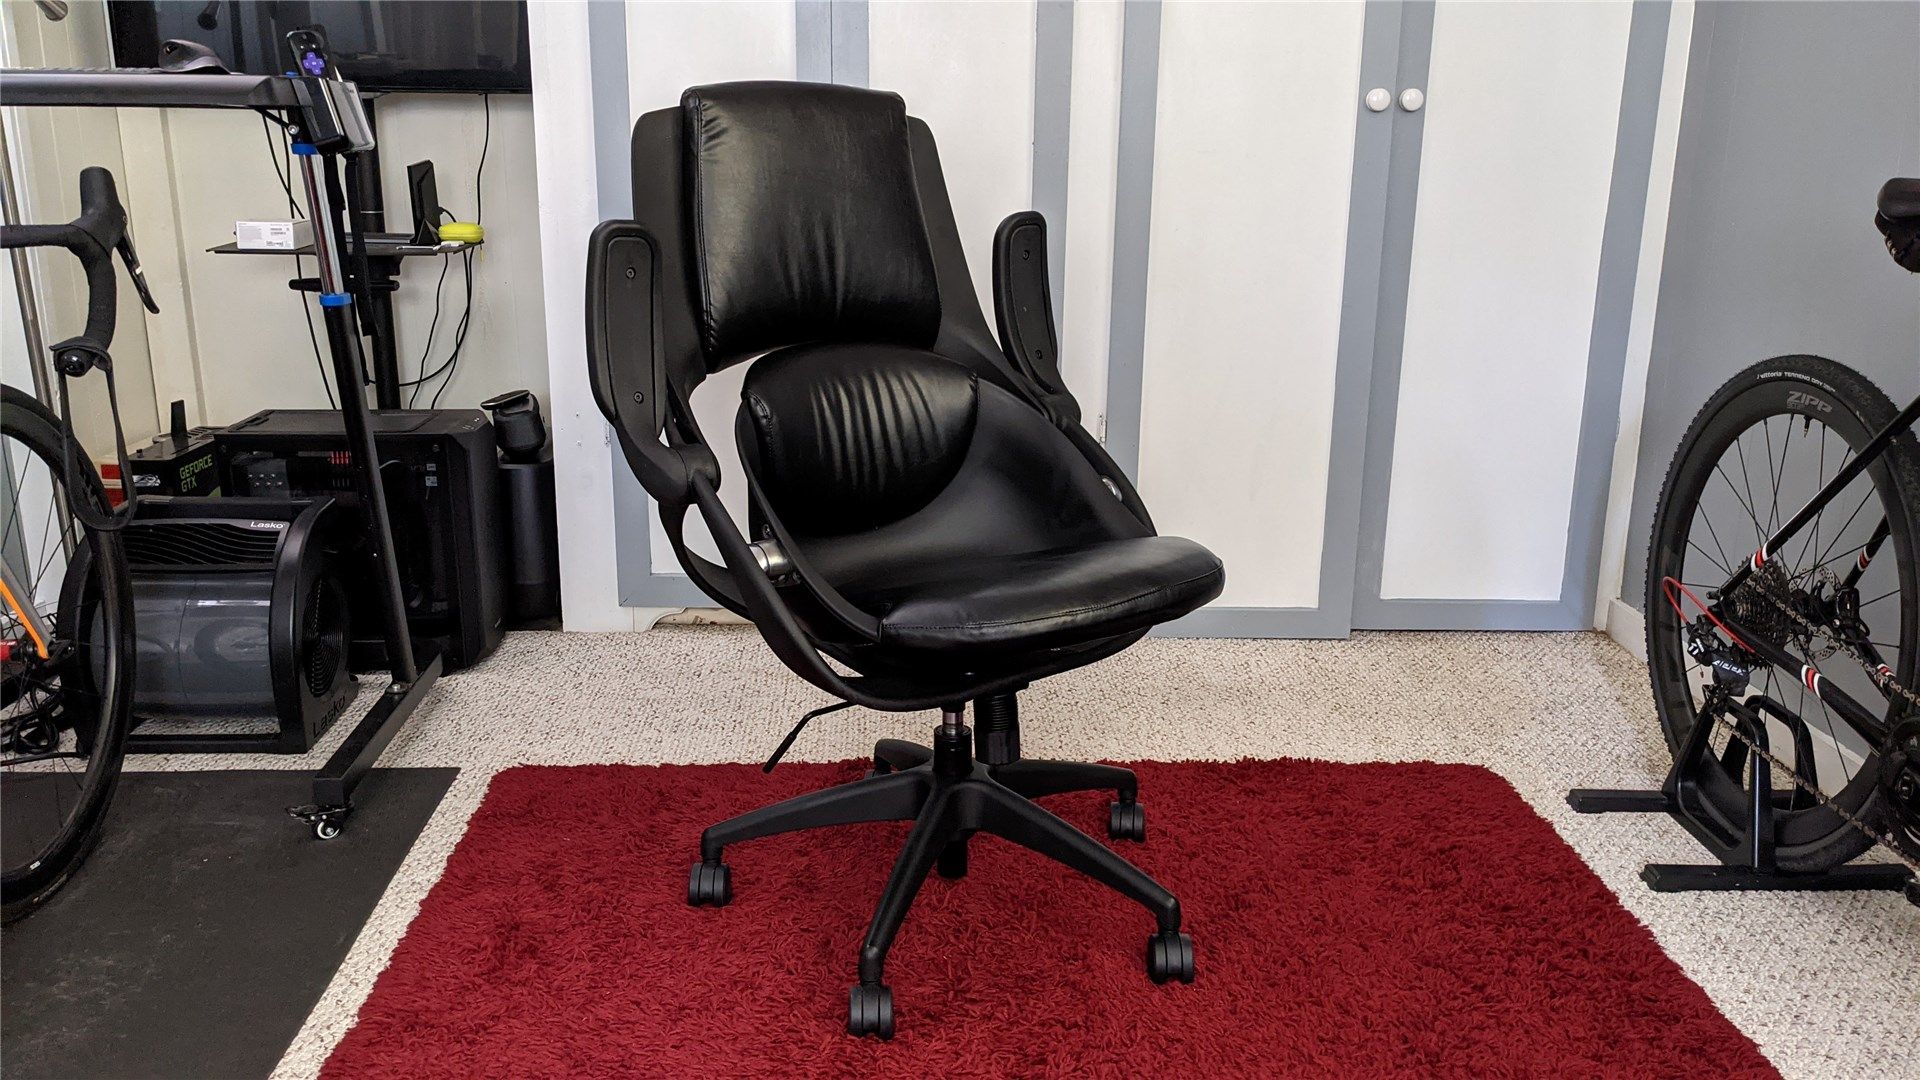 The BackStrong C1 chair with the arms up